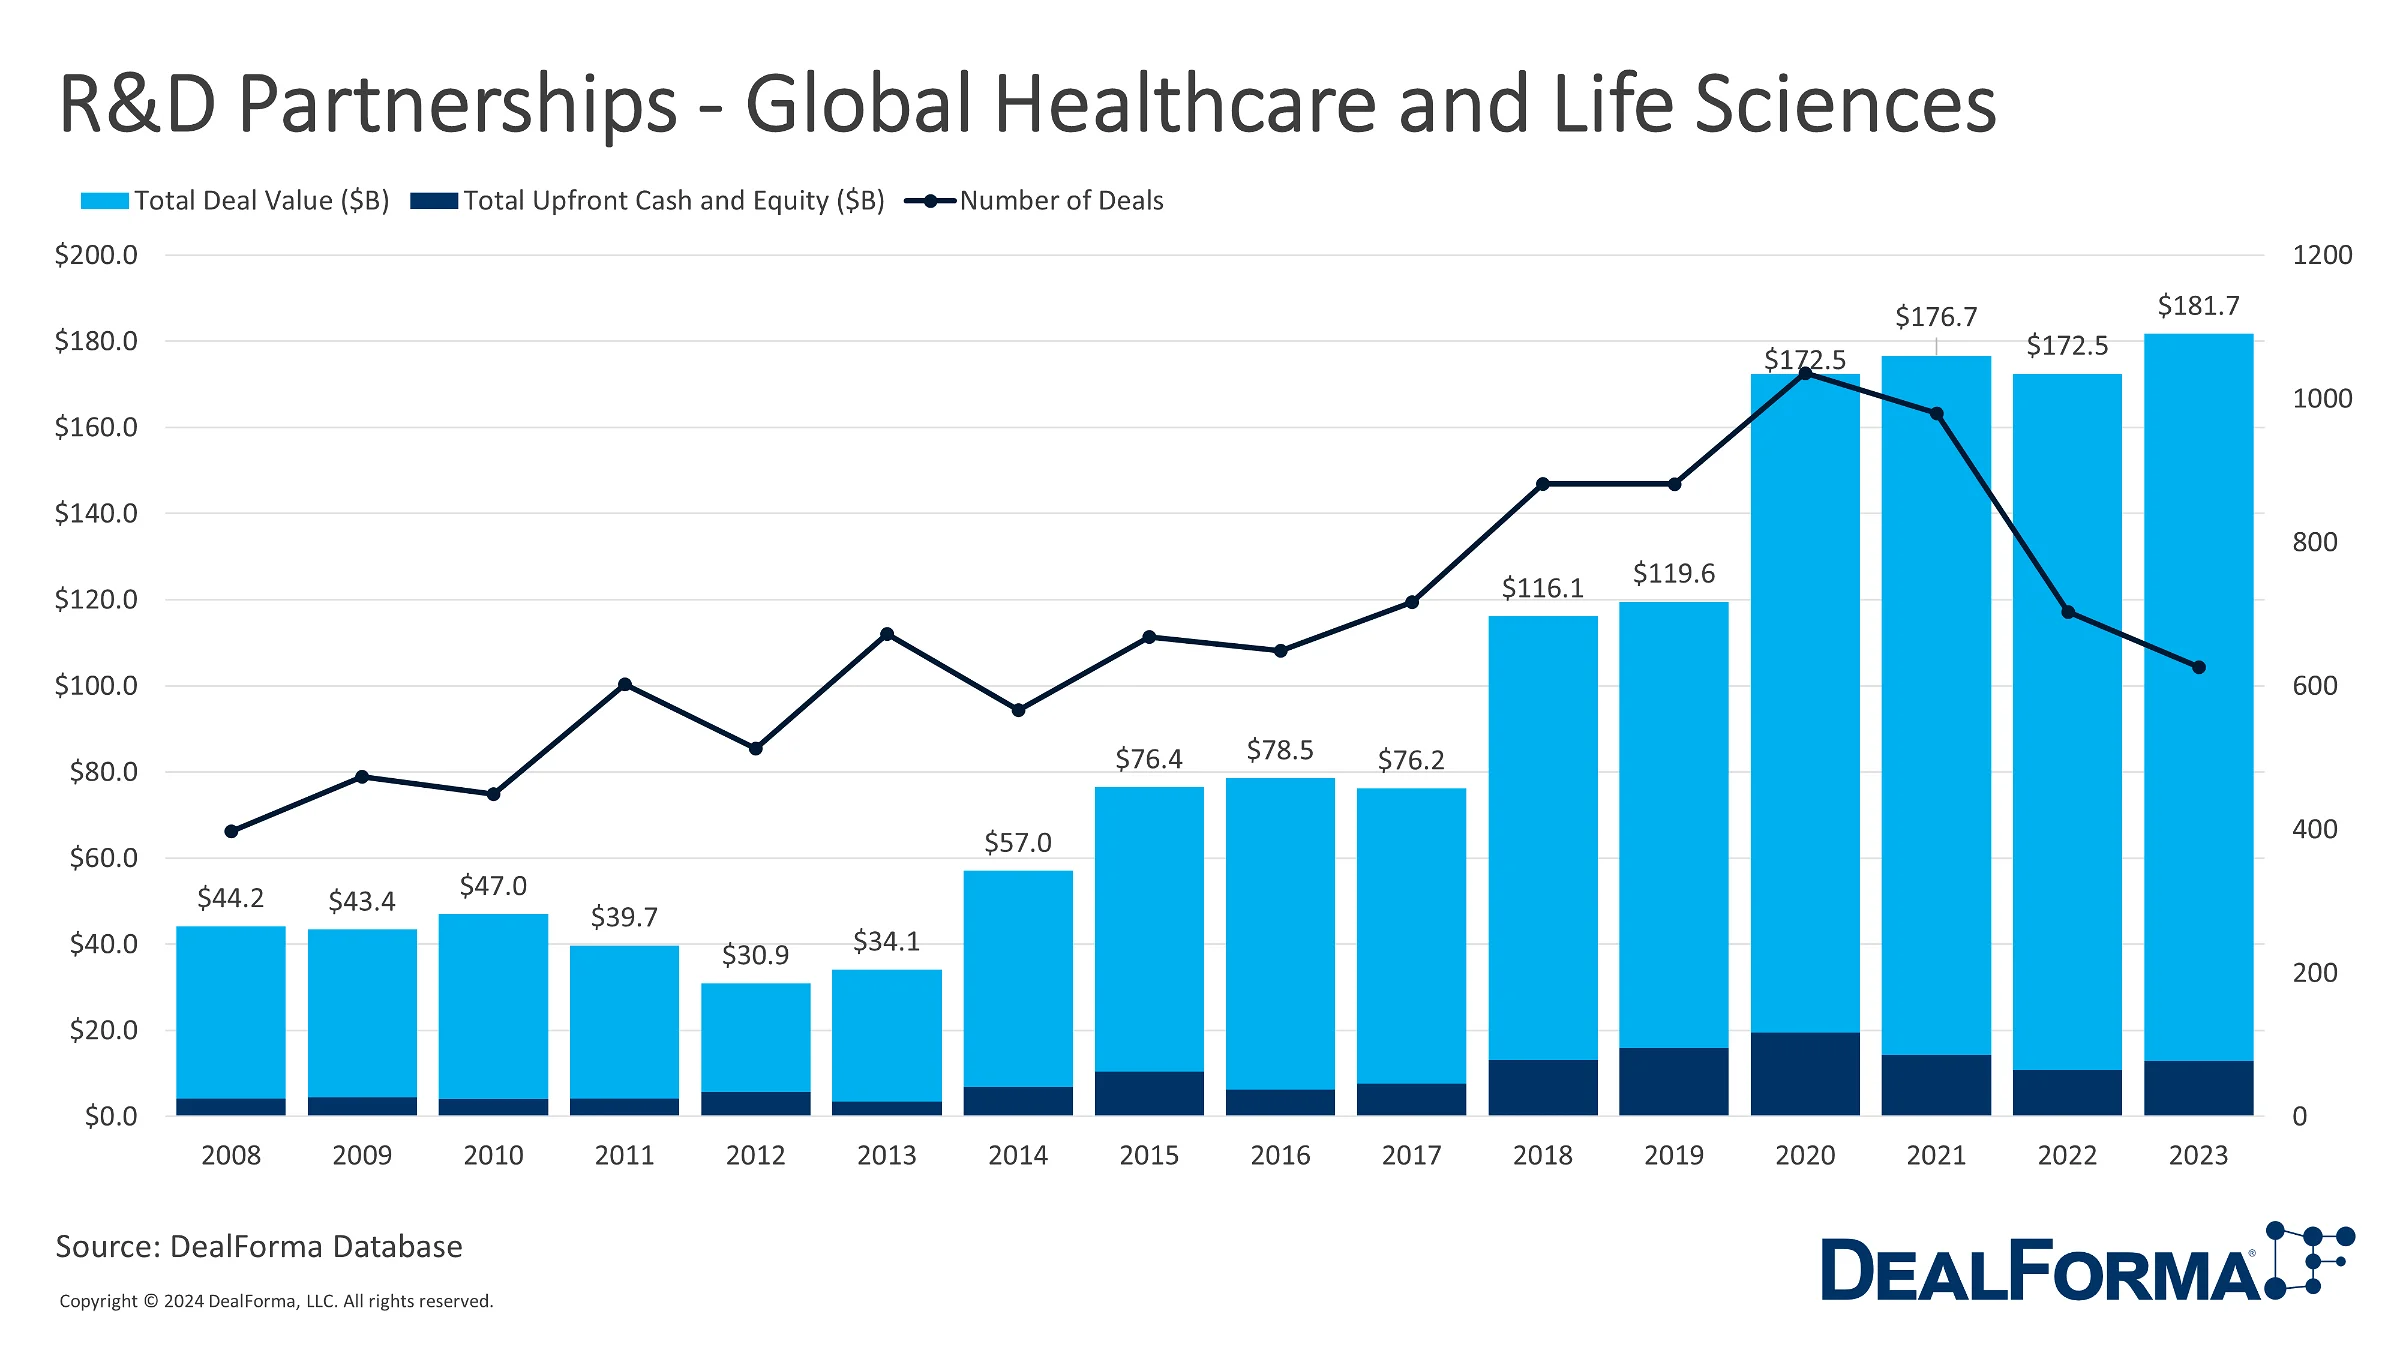 RD Partnerships Global Healthcare and Life Sciences